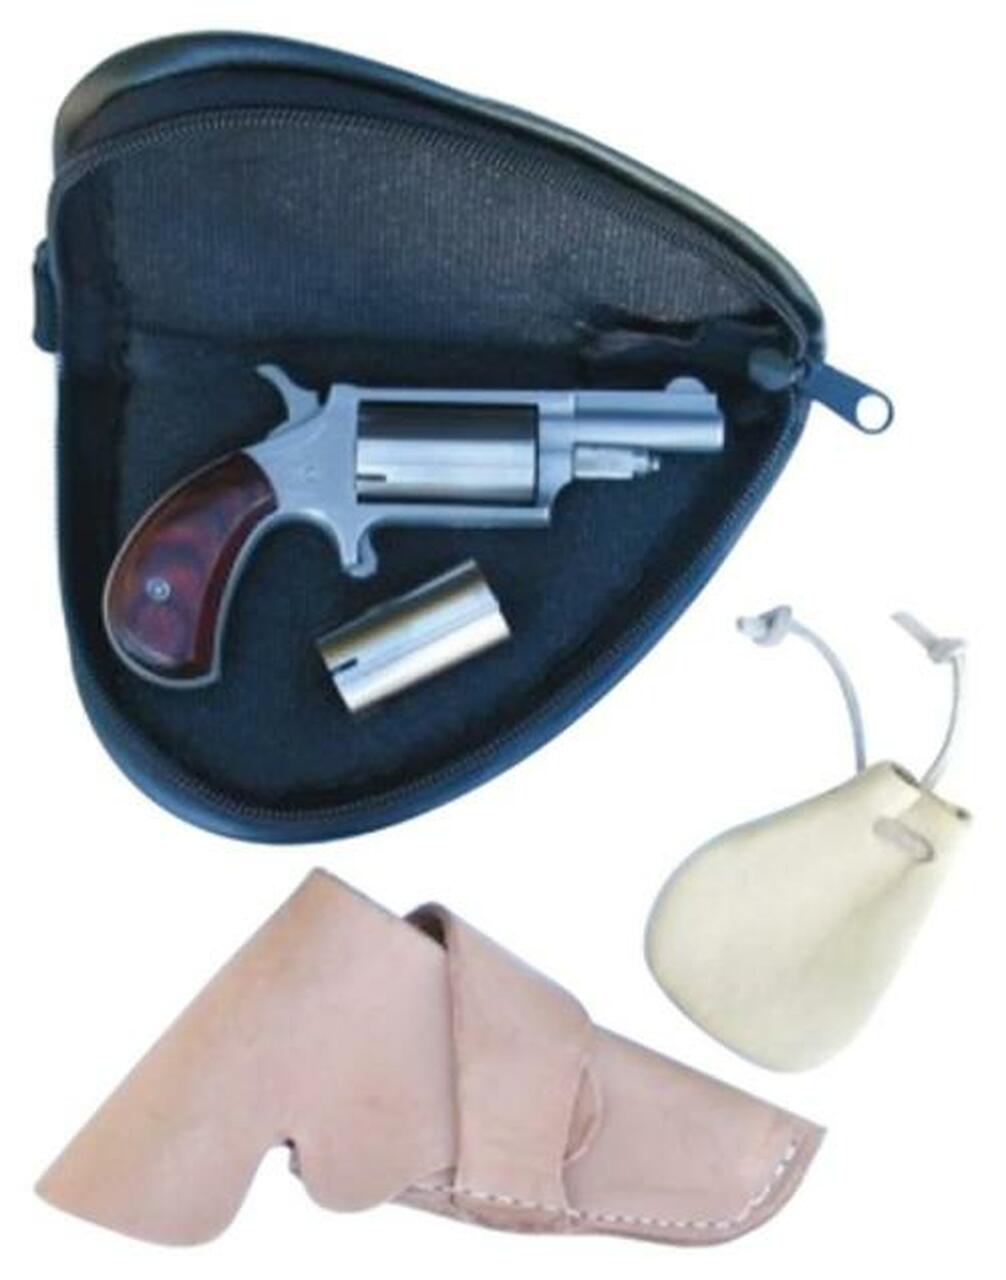 Image of North American Arms Companion Super Cap And Ball Revolver .22 Caliber 1.875" Barrel Stainless Steel 5 Shot